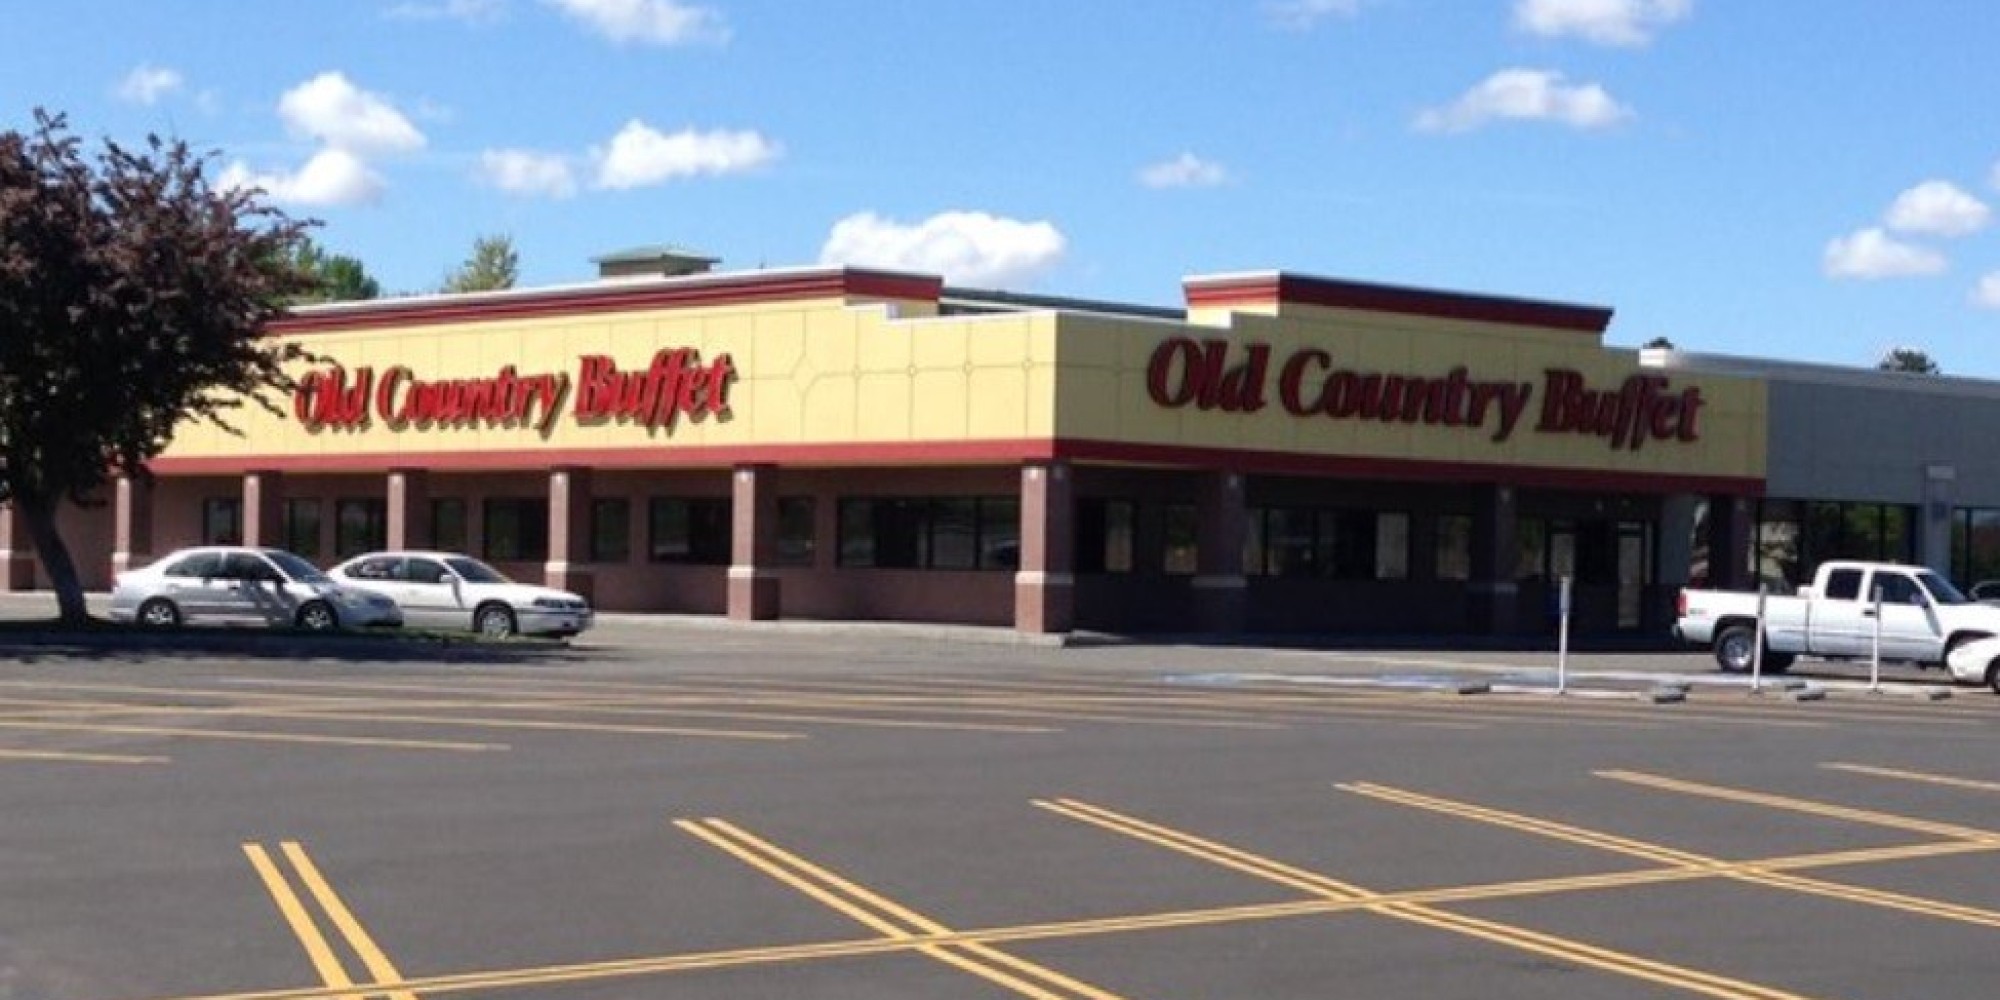 Old country buffet ford city #4